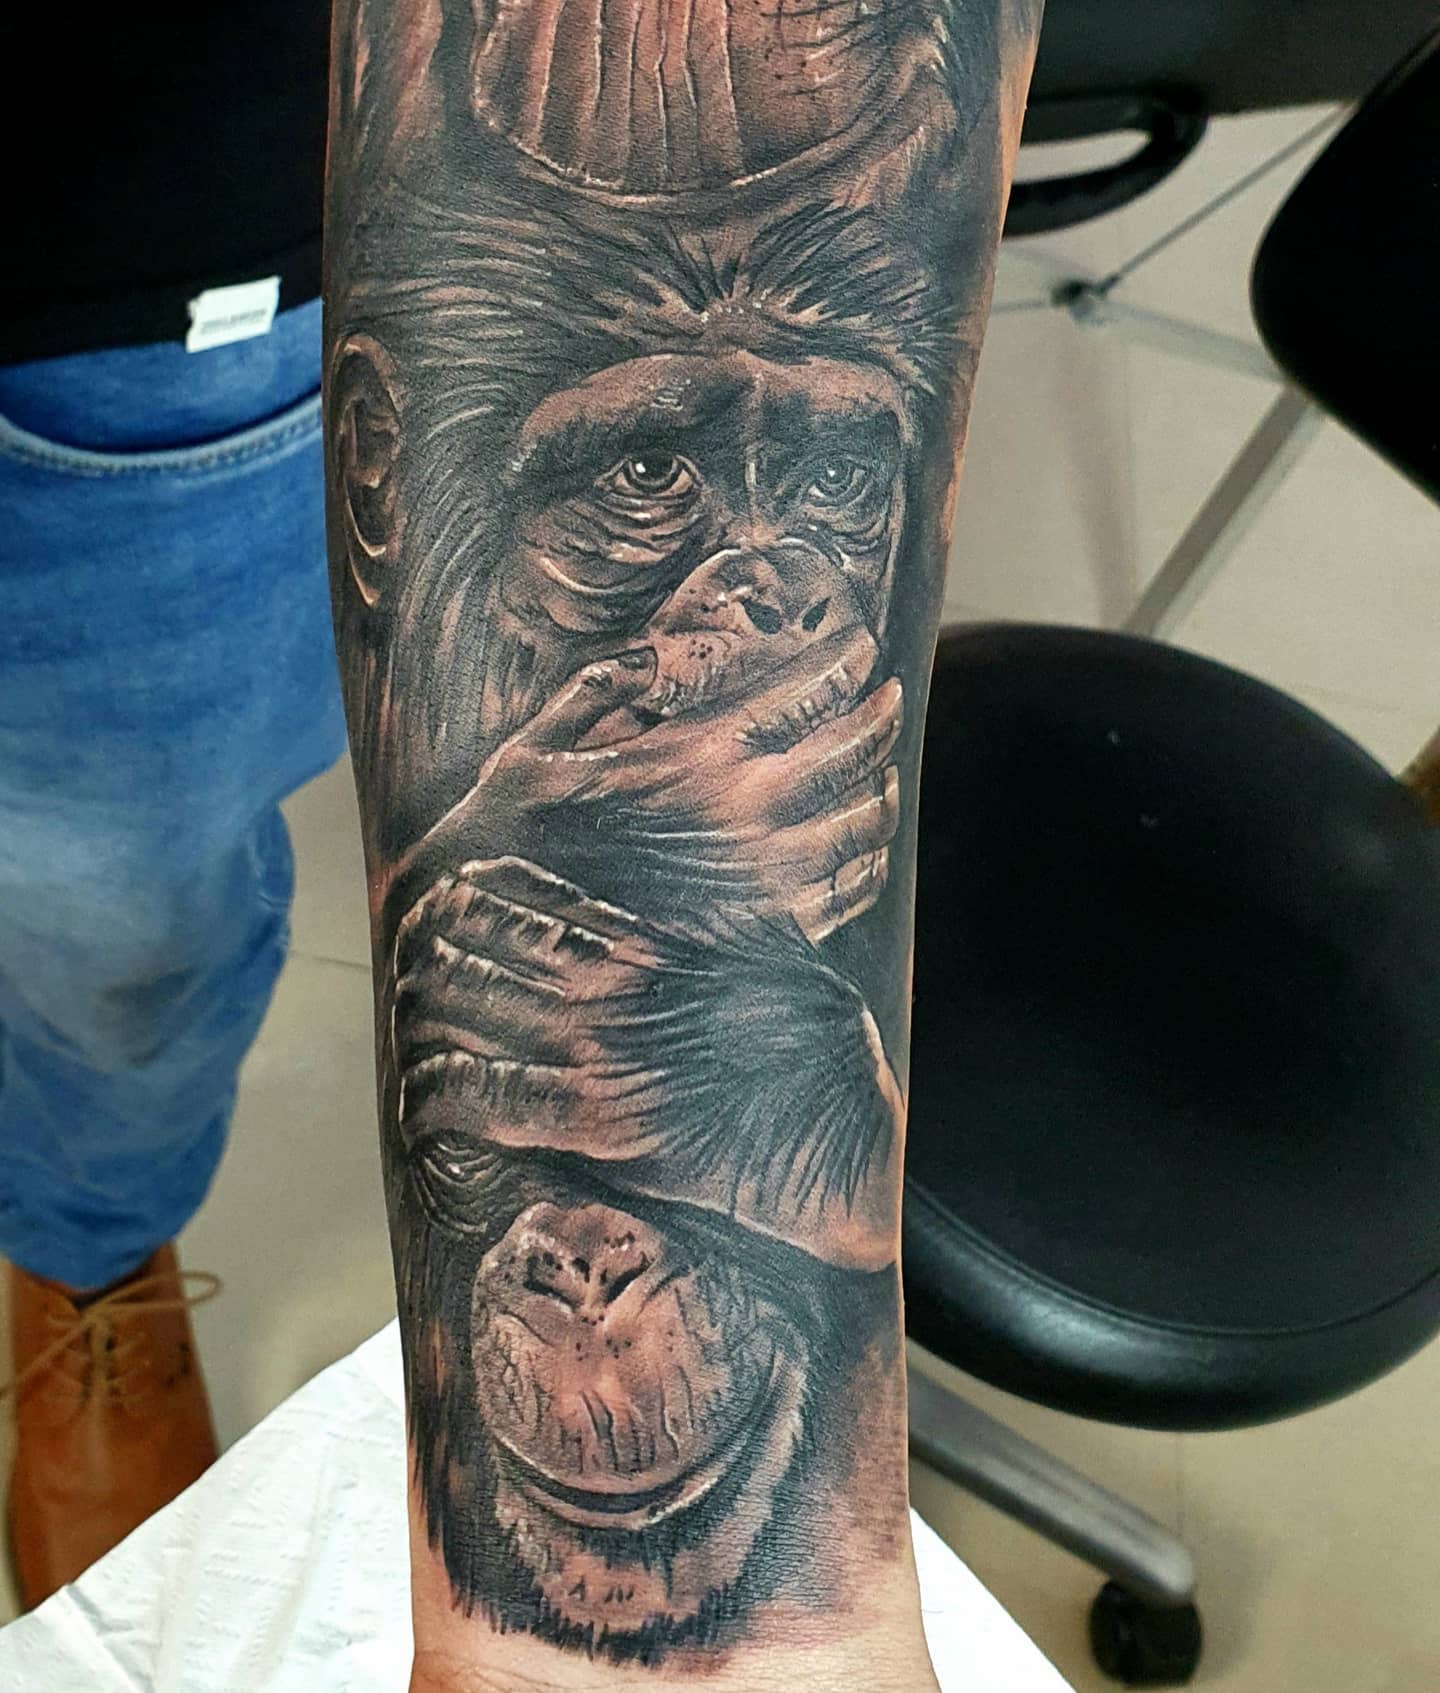 The Top 27 Monkey Tattoo Ideas - [2021 Inspiration Guide]